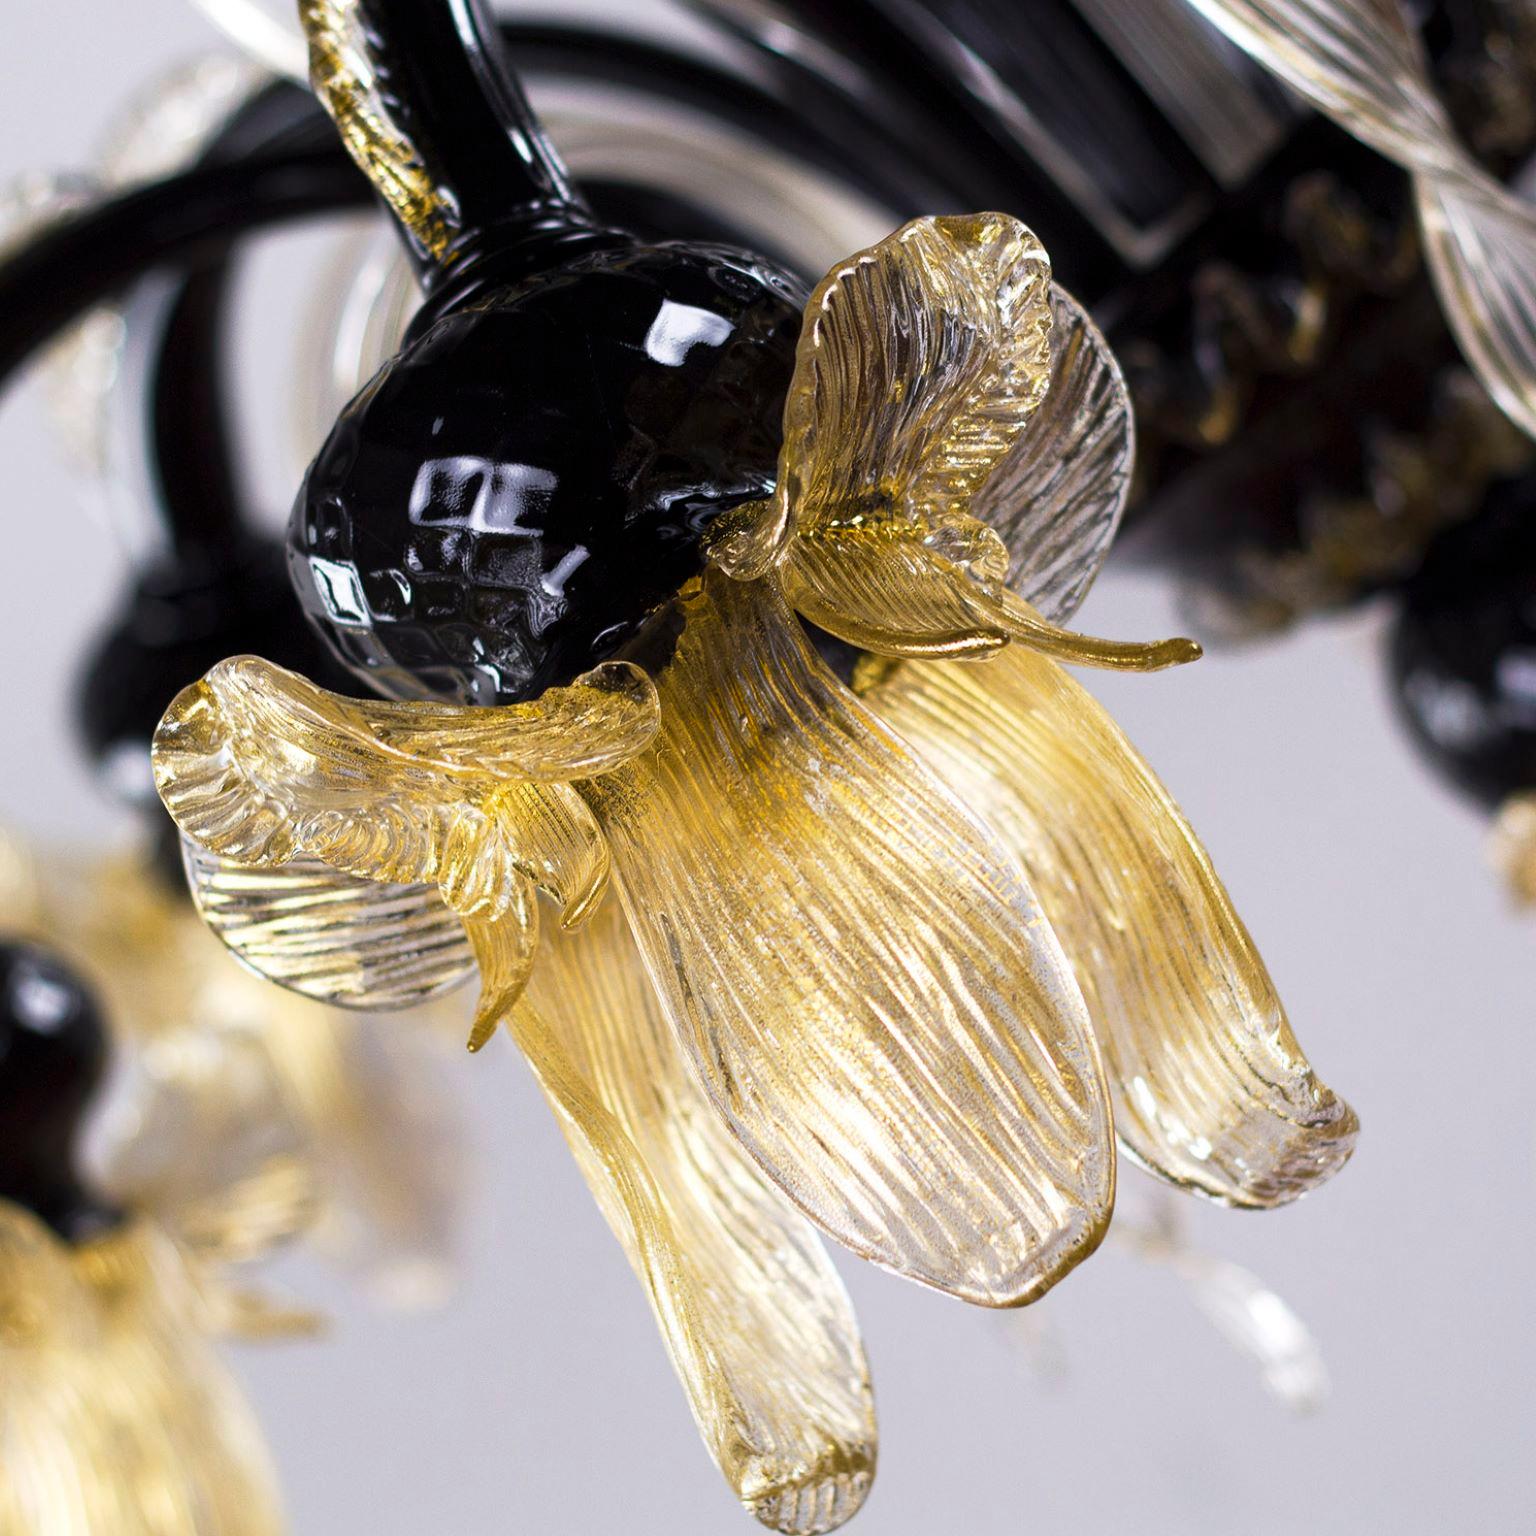 Artistic chandelier 6 arms black and gold Murano glass with upper flowers and leaves Iris garden by Multiforme
Original and innovative artistic glass chandeliers Iris garden. A collection inspired from the flowers. Iris garden is a lighting work